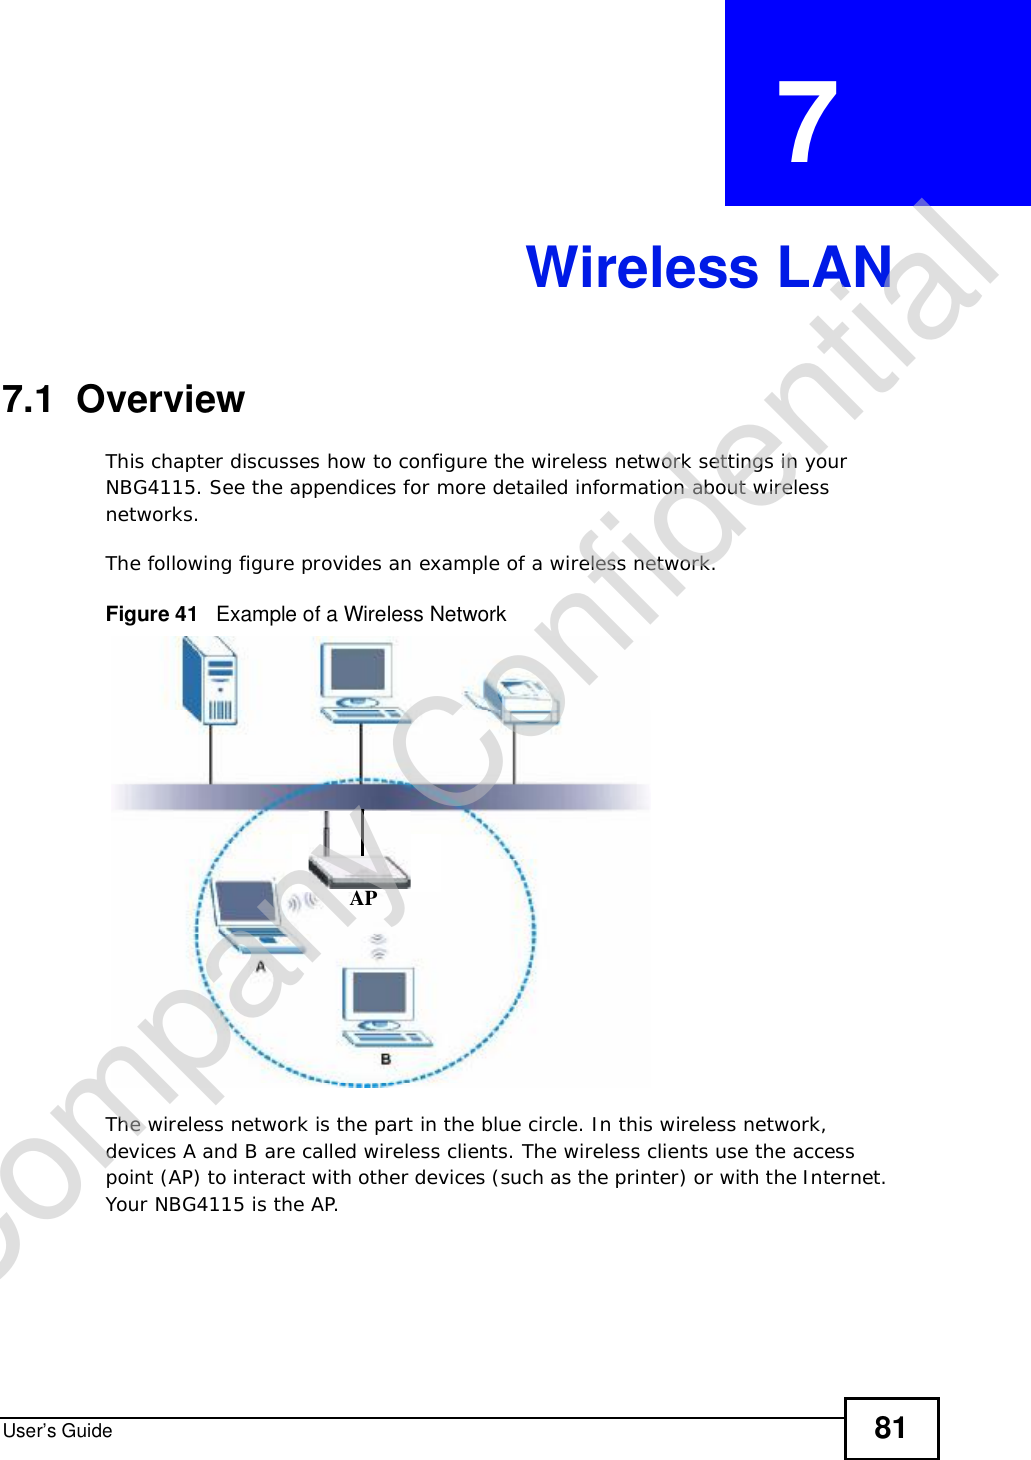 User’s Guide 81CHAPTER  7 Wireless LAN7.1  OverviewThis chapter discusses how to configure the wireless network settings in your NBG4115. See the appendices for more detailed information about wireless networks.The following figure provides an example of a wireless network.Figure 41   Example of a Wireless NetworkThe wireless network is the part in the blue circle. In this wireless network, devices A and B are called wireless clients. The wireless clients use the access point (AP) to interact with other devices (such as the printer) or with the Internet. Your NBG4115 is the AP.APCompany Confidential